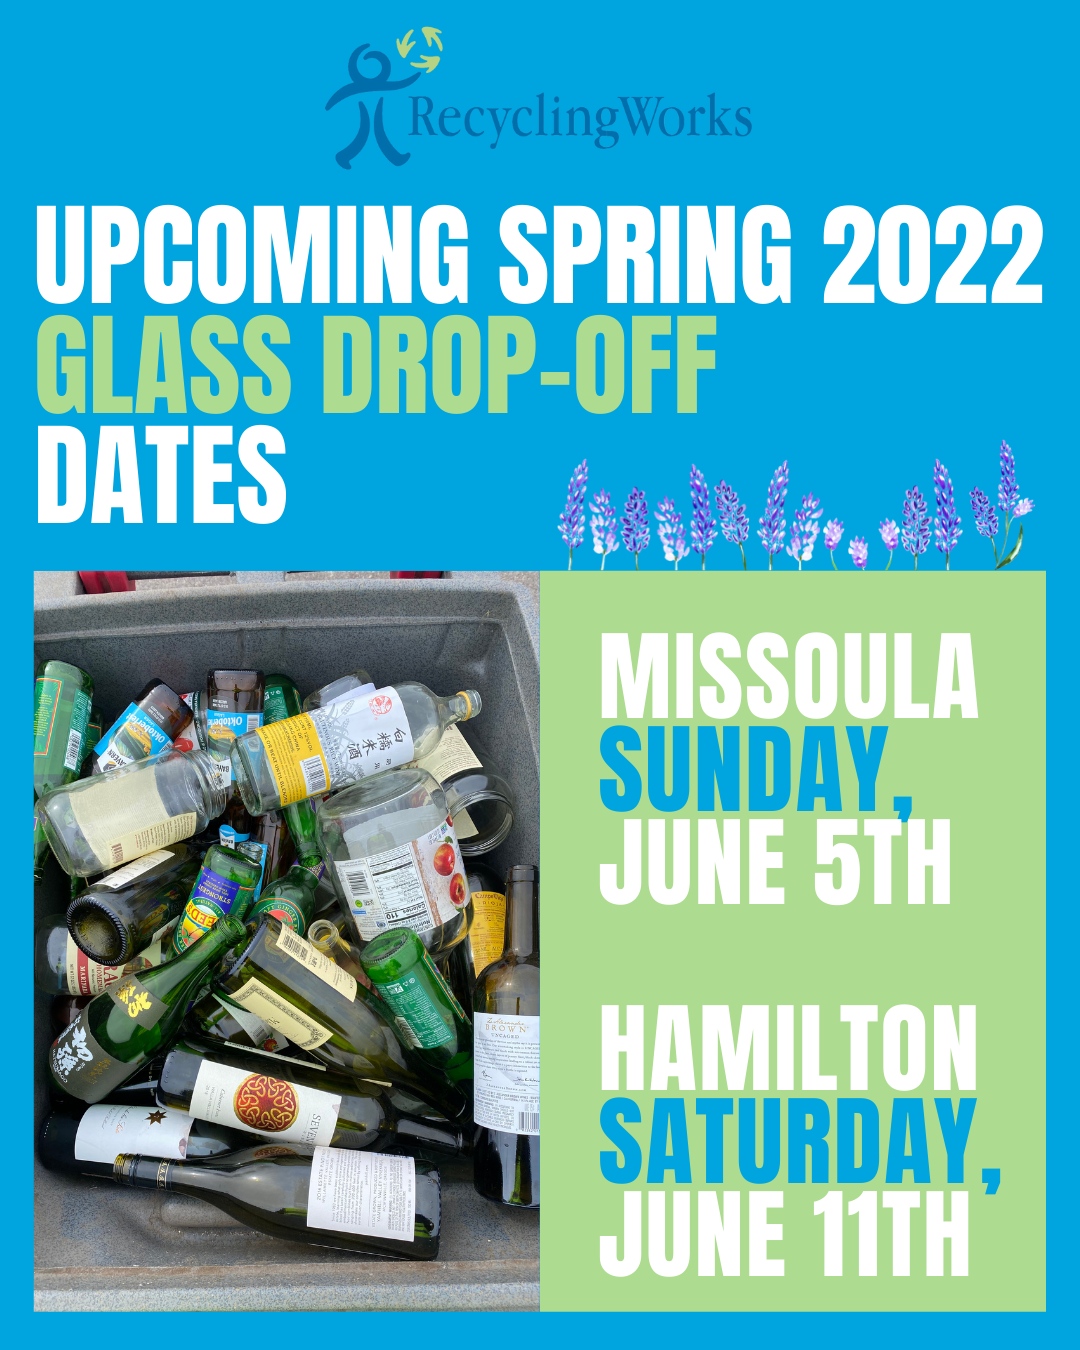 Upcoming Glass Recycling Drop-off Dates – Spring 2022